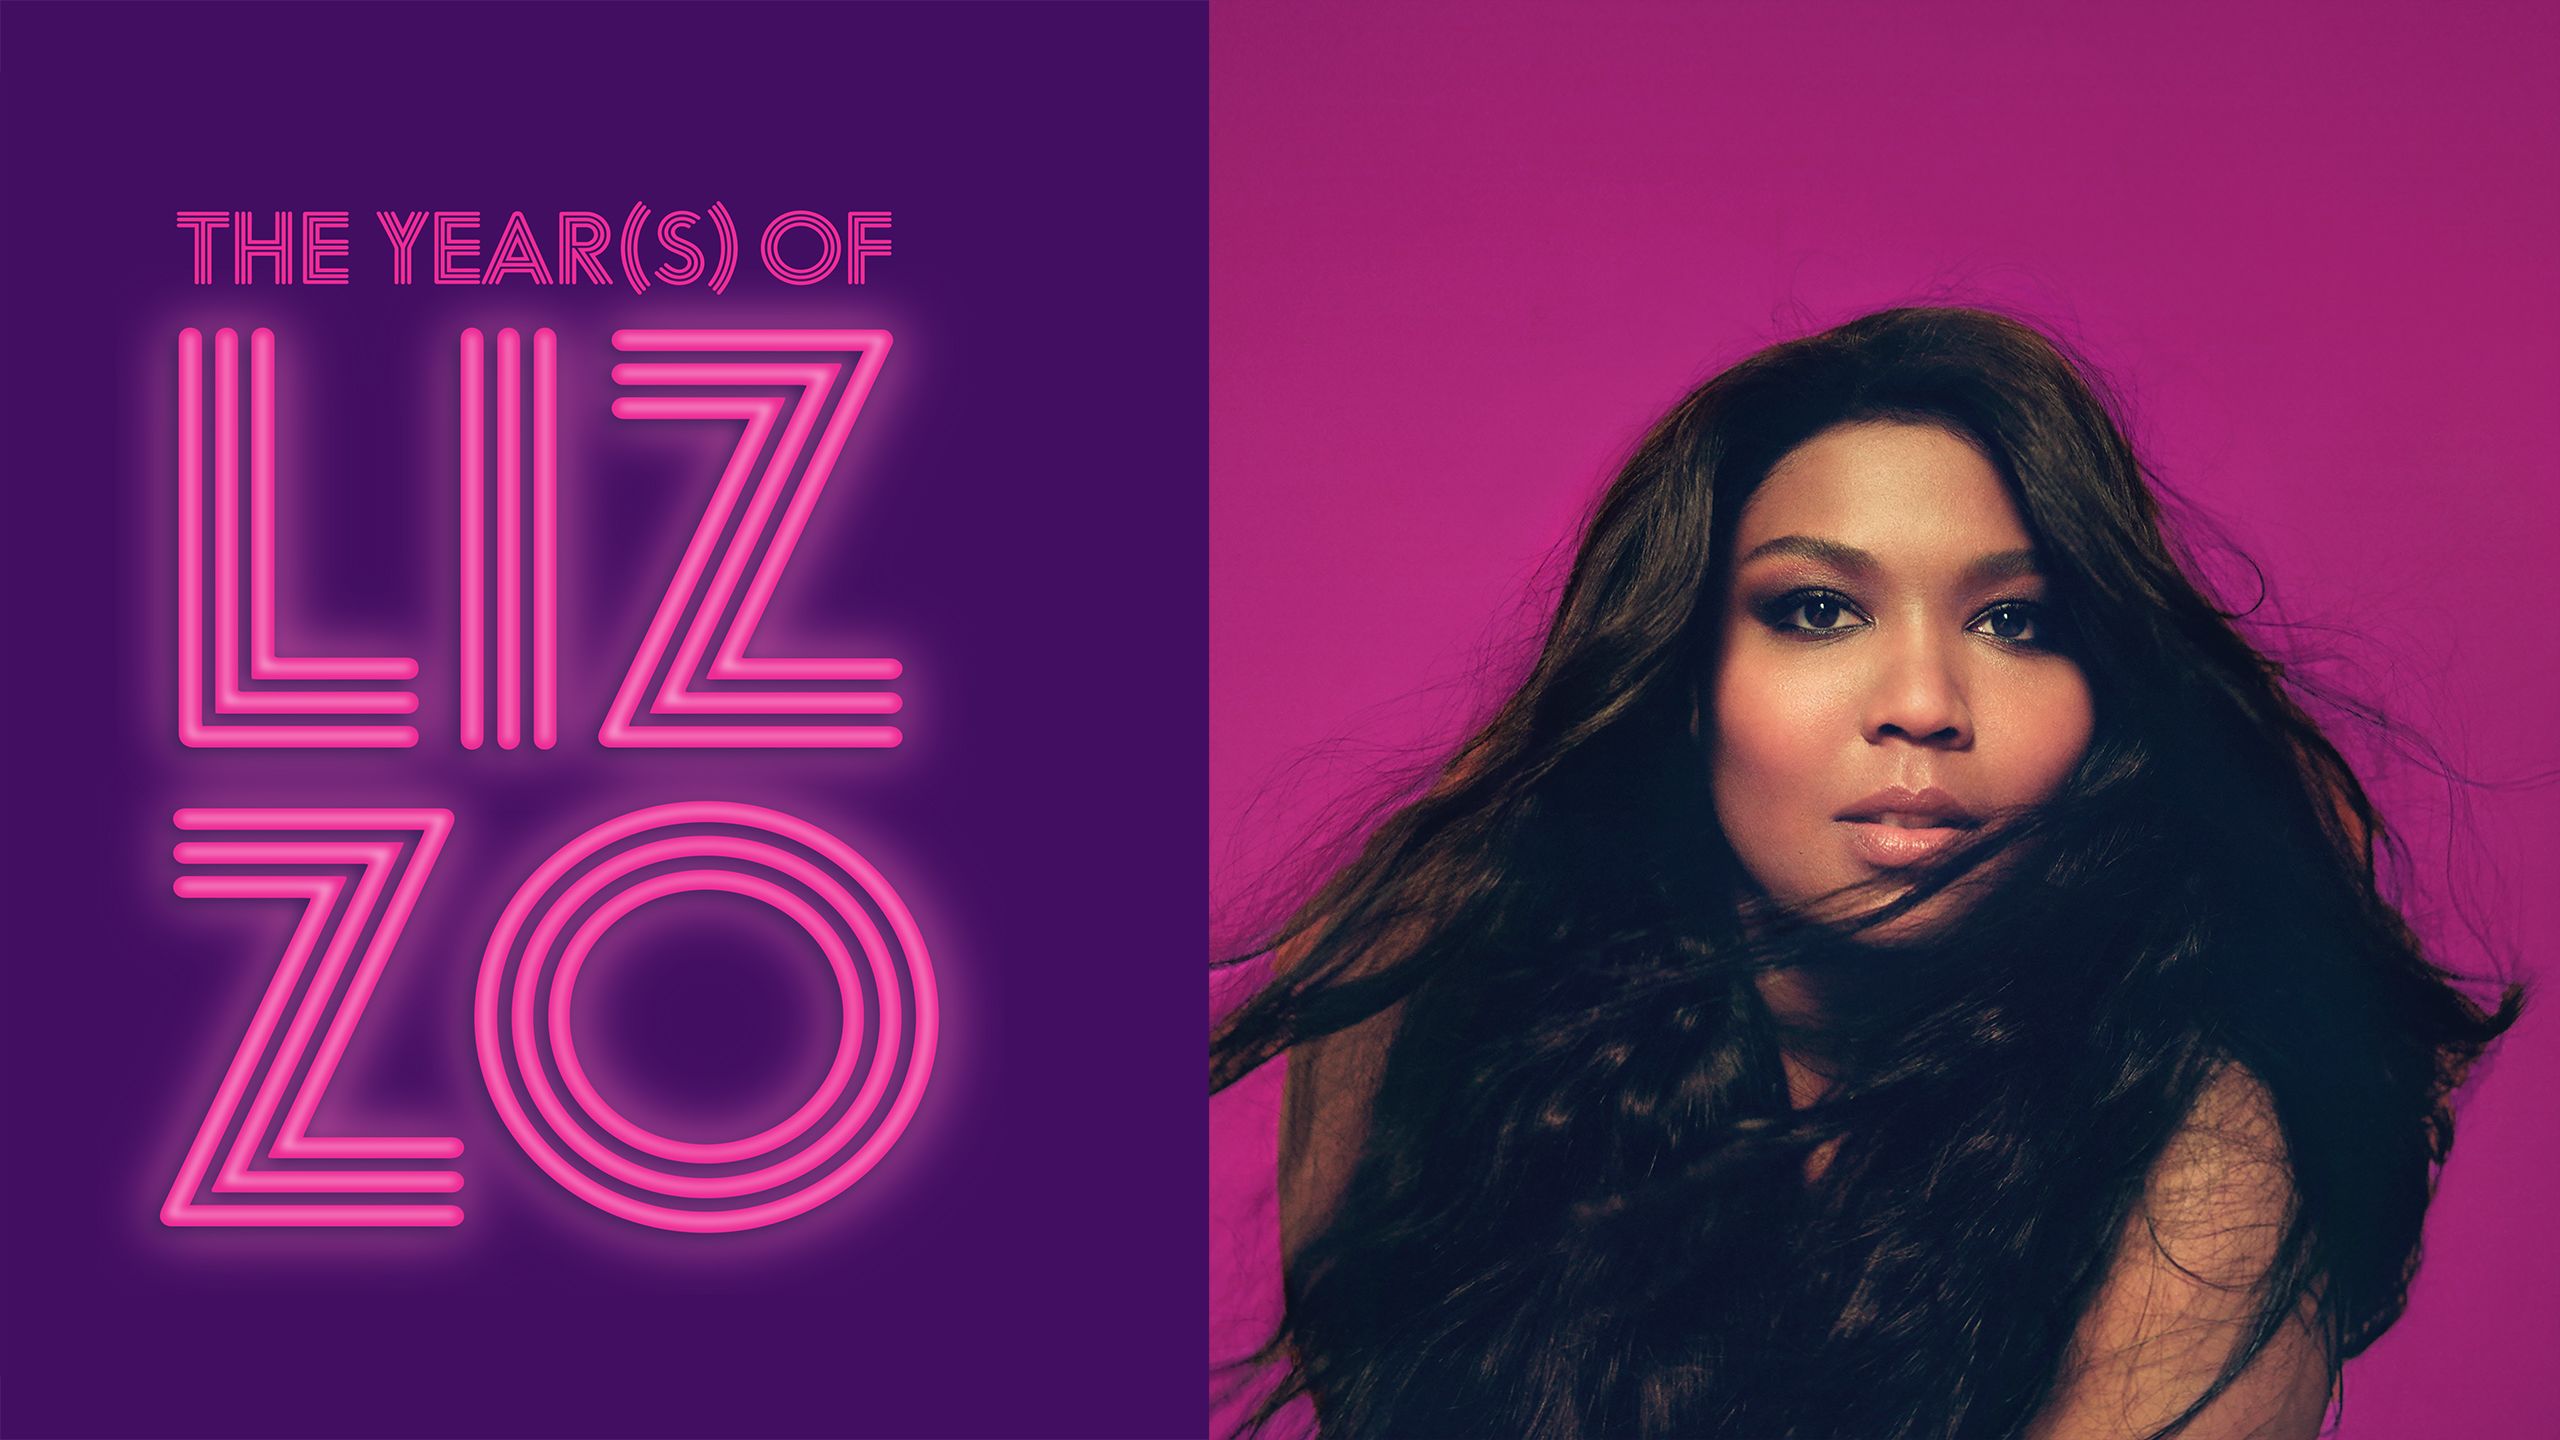 The year(s) of LIZZO